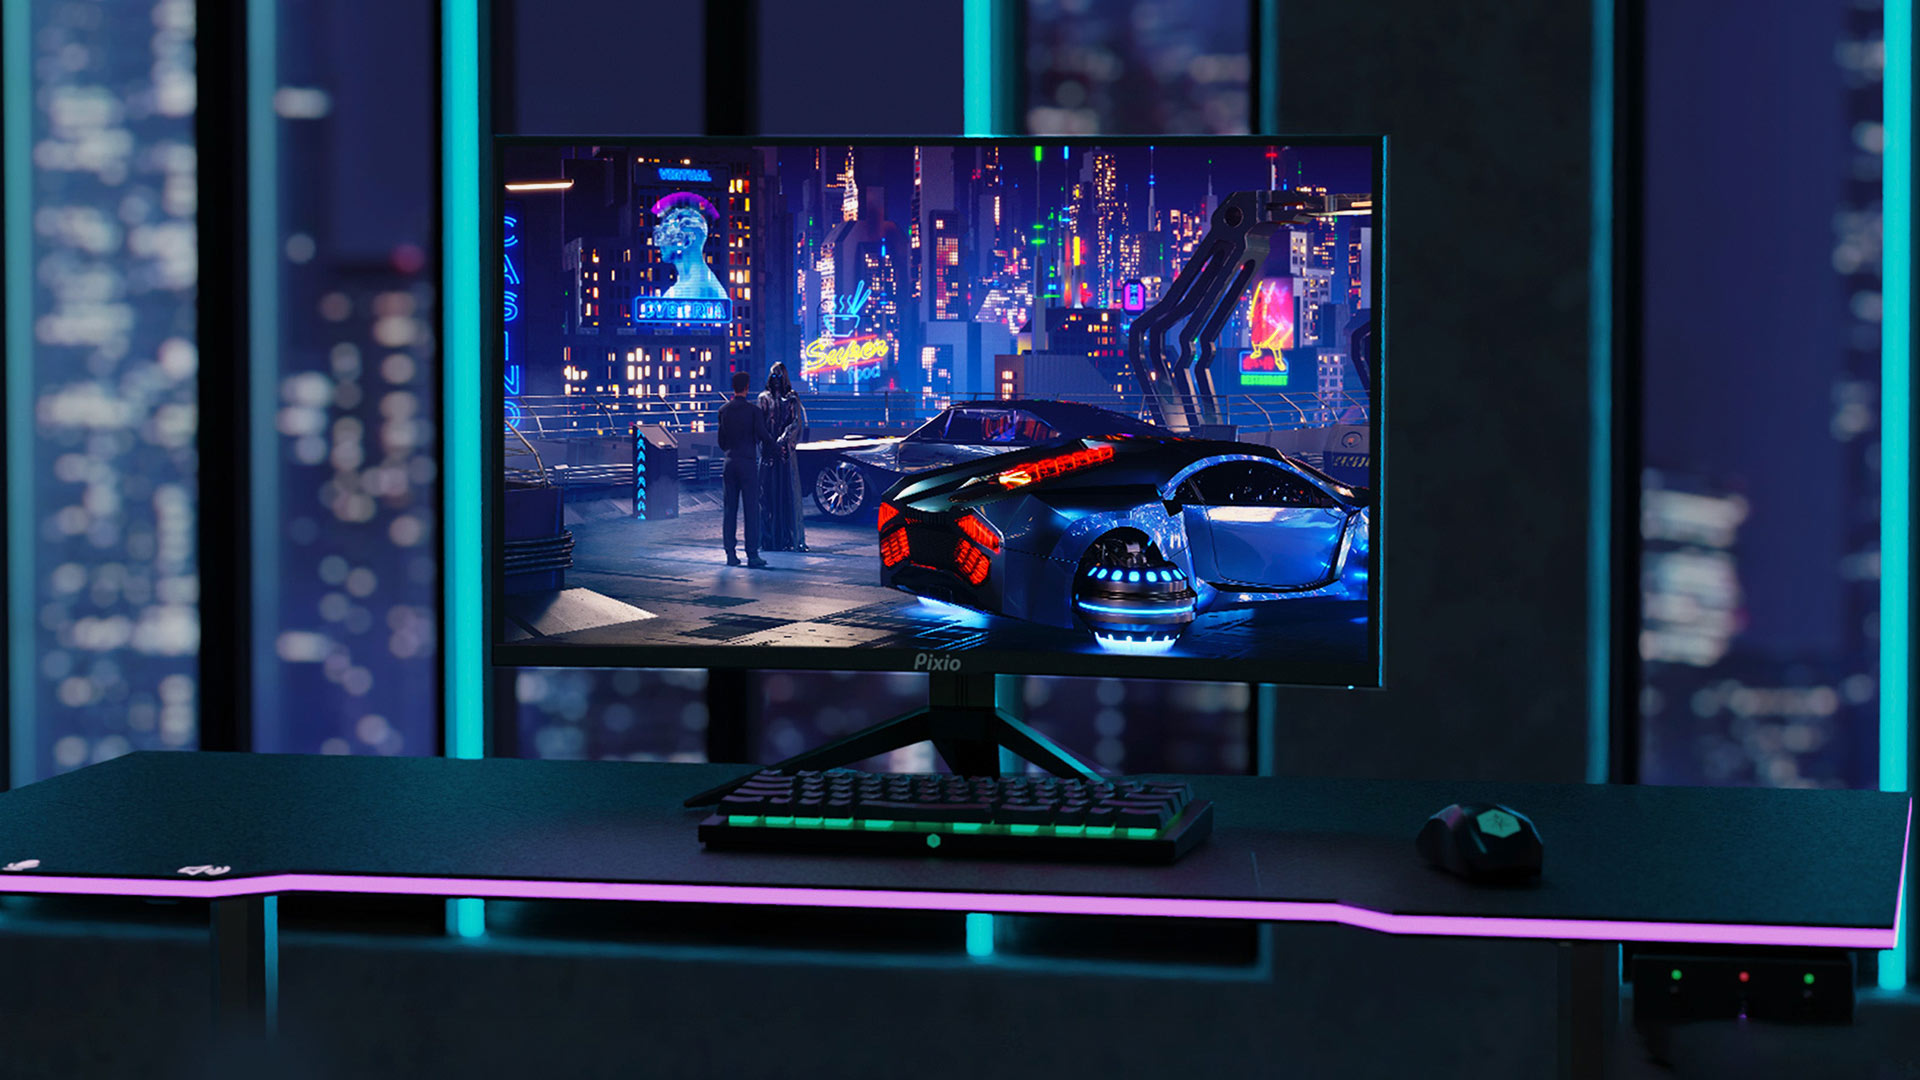 Pixio PXC277 Advanced Curved Gaming Monitor